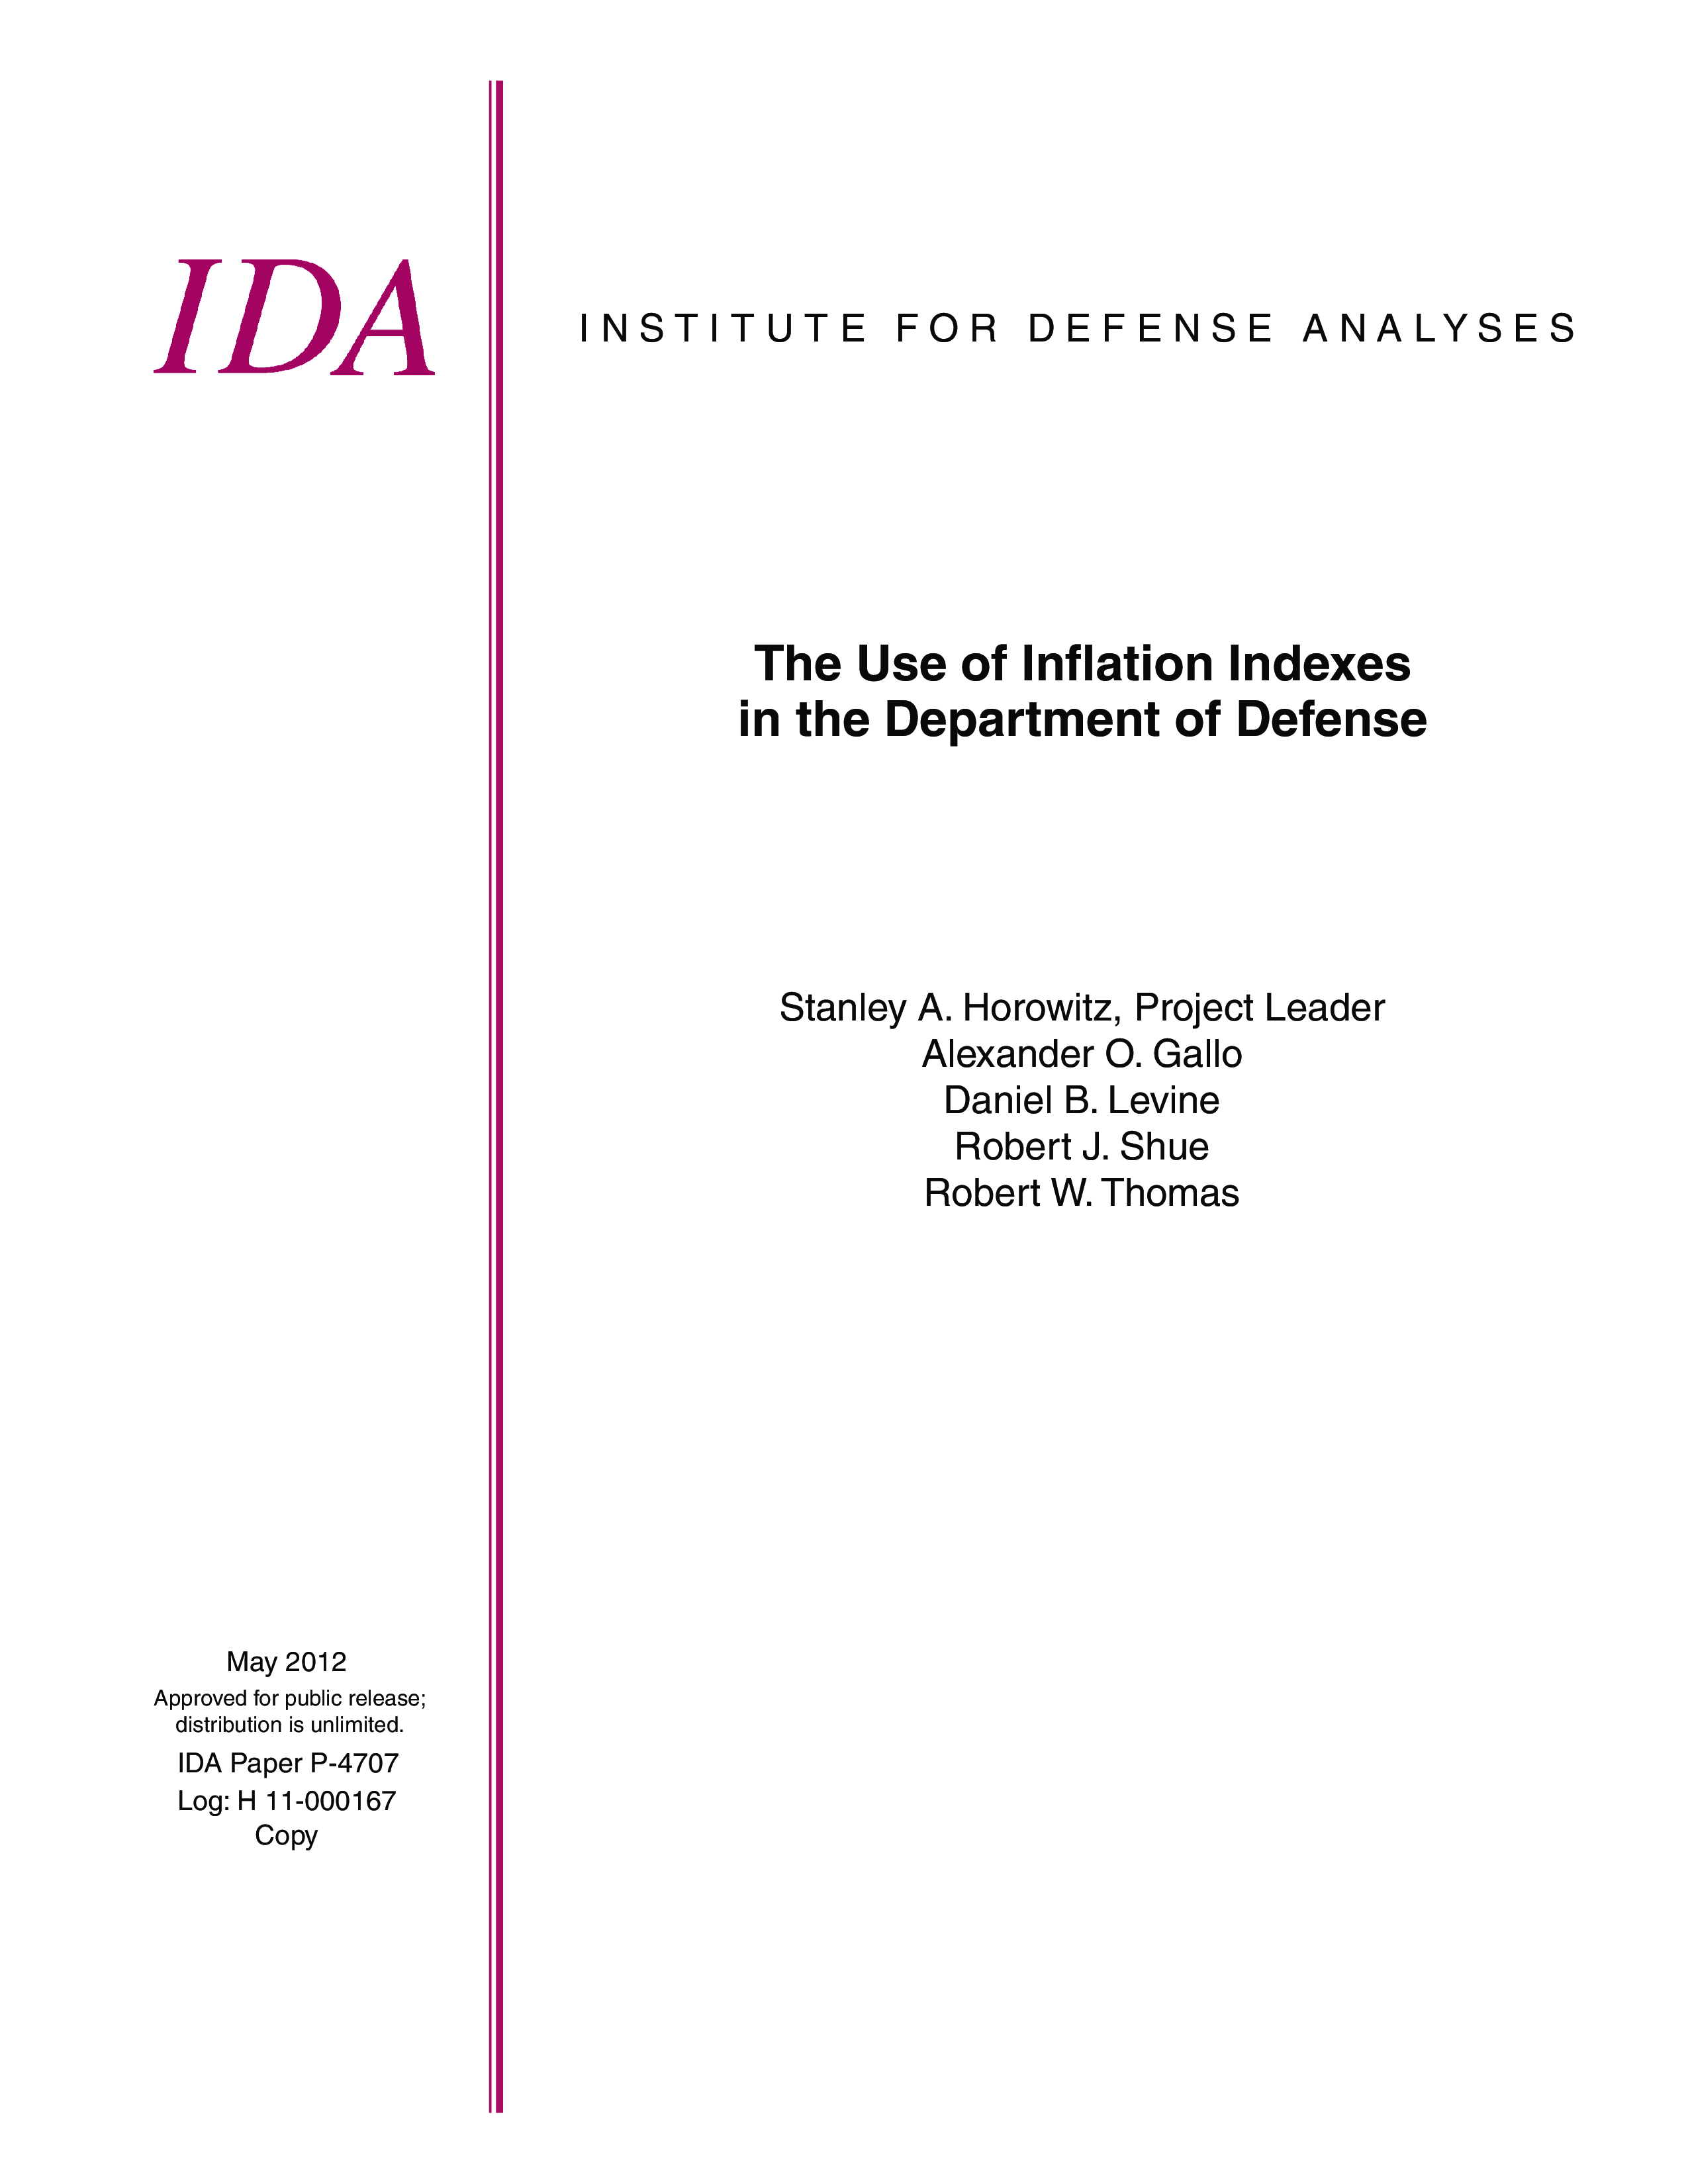 The Use of Infration Indexes in the Department of Defense